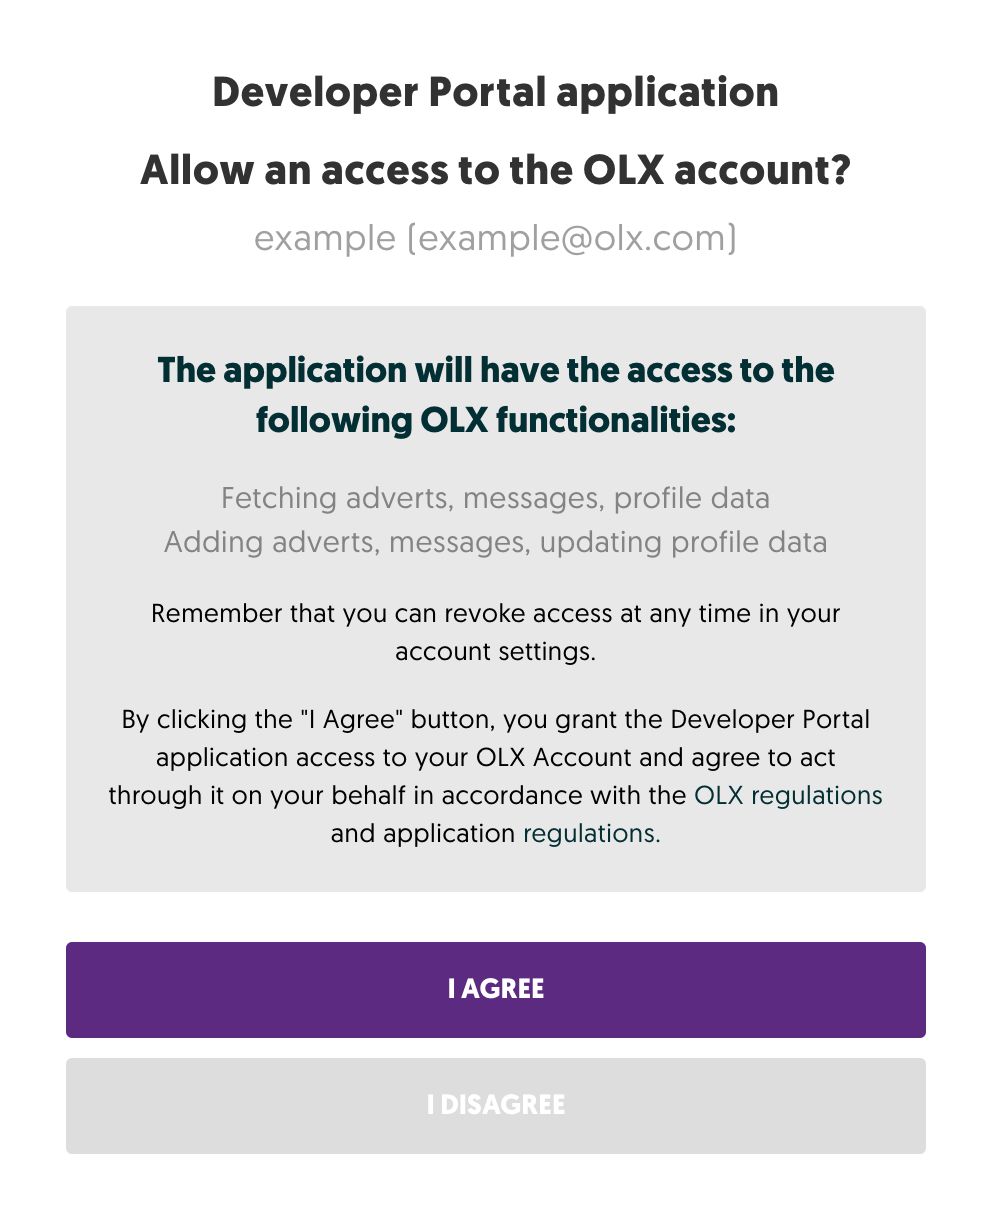 Connecting to the OLX account